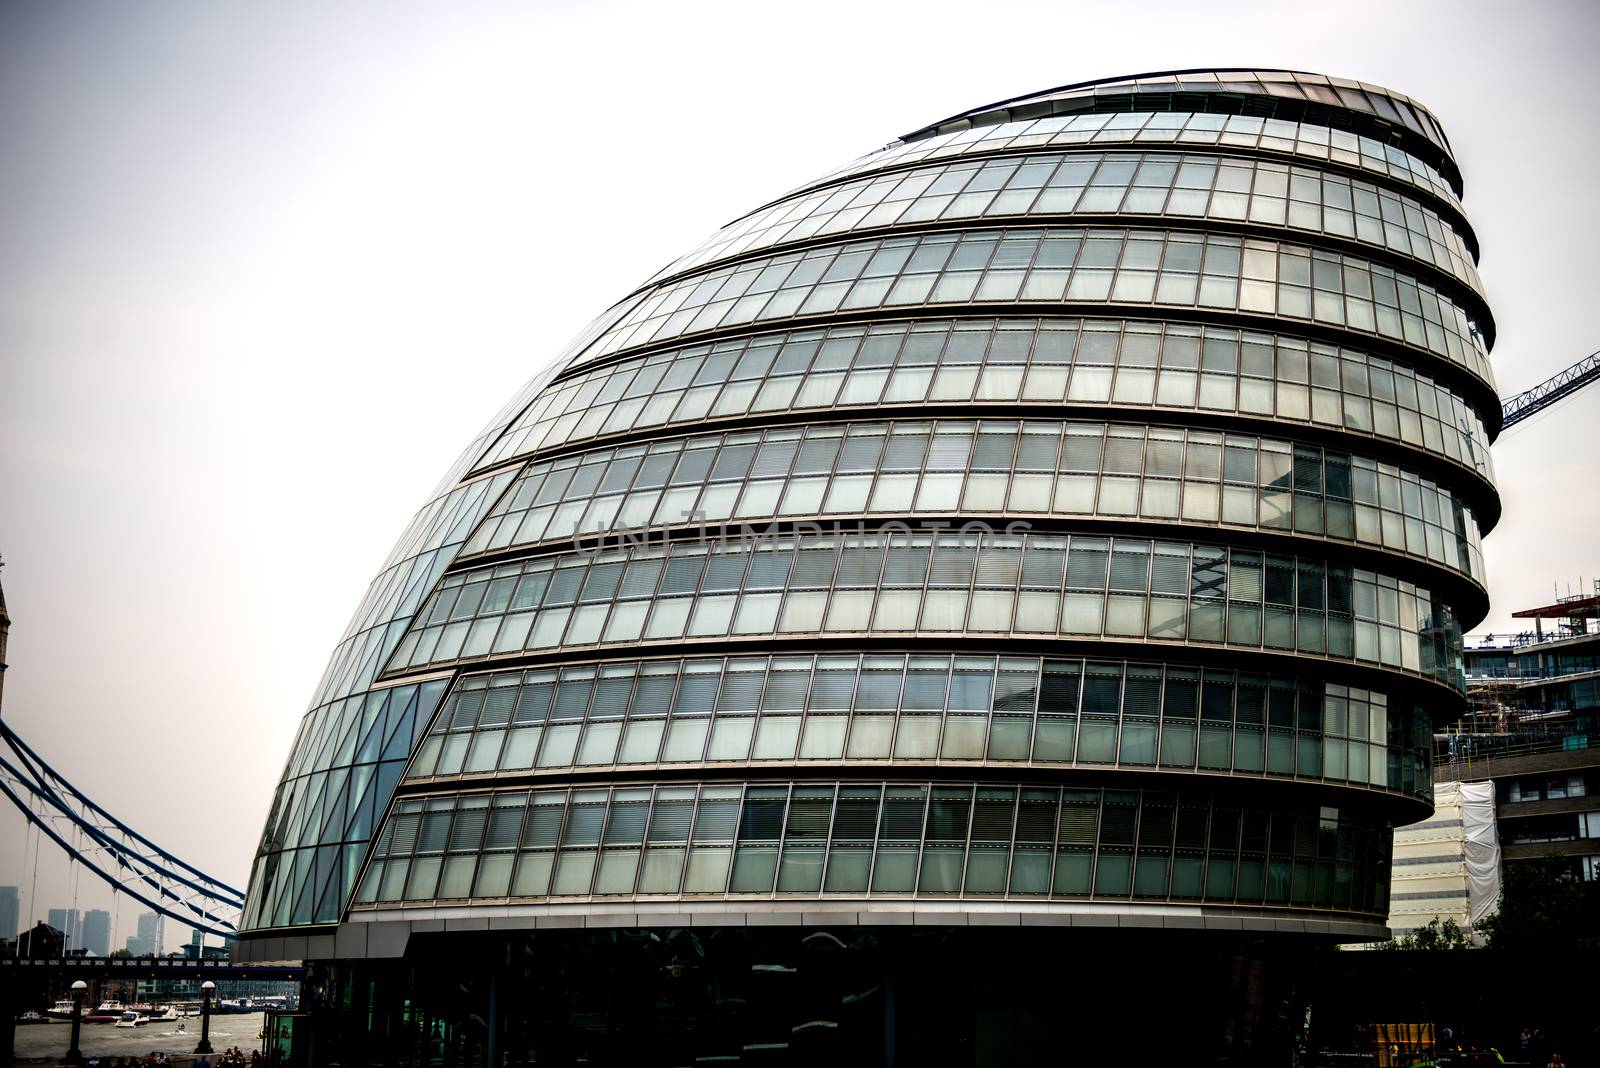 City Hall, the headquarters of the Greater London Authority by MohanaAntonMeryl